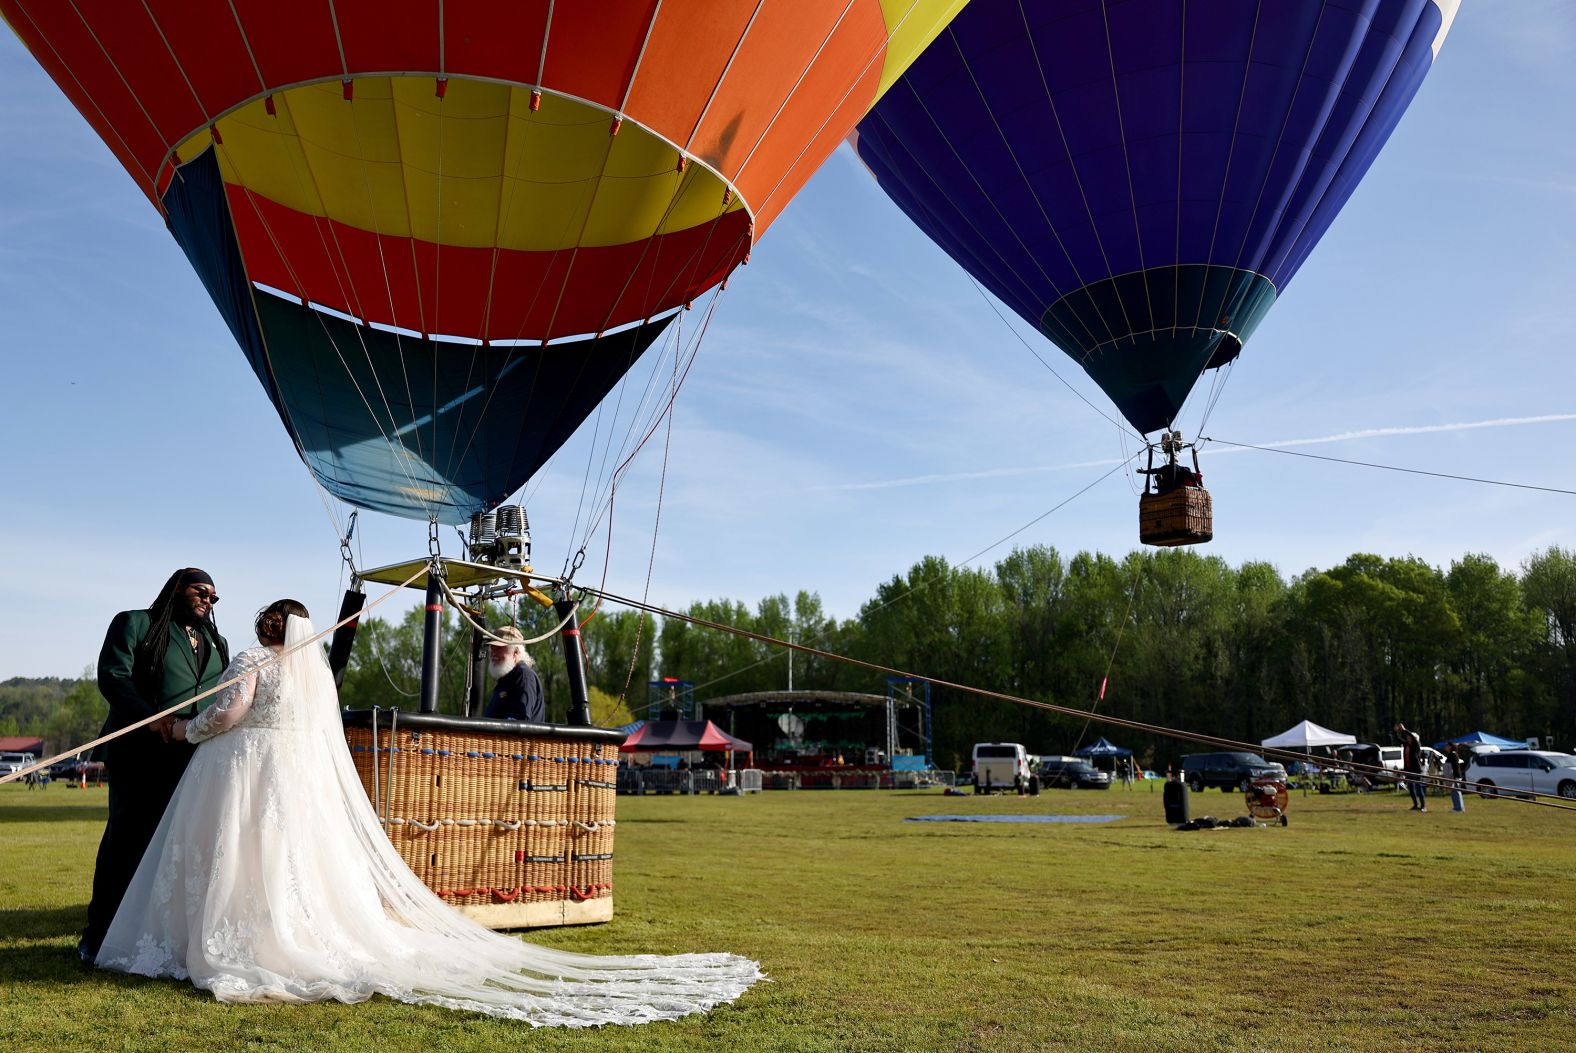 Kylee and Michael Rice prepare to take a hot air balloon ride before the <a href="https://www.cnn.com/world/live-news/total-solar-eclipse-04-08-24-scn/h_c5bf02a1f61852f076e1c082cd6f6290" target="_blank">mass wedding event </a>in Russellville.